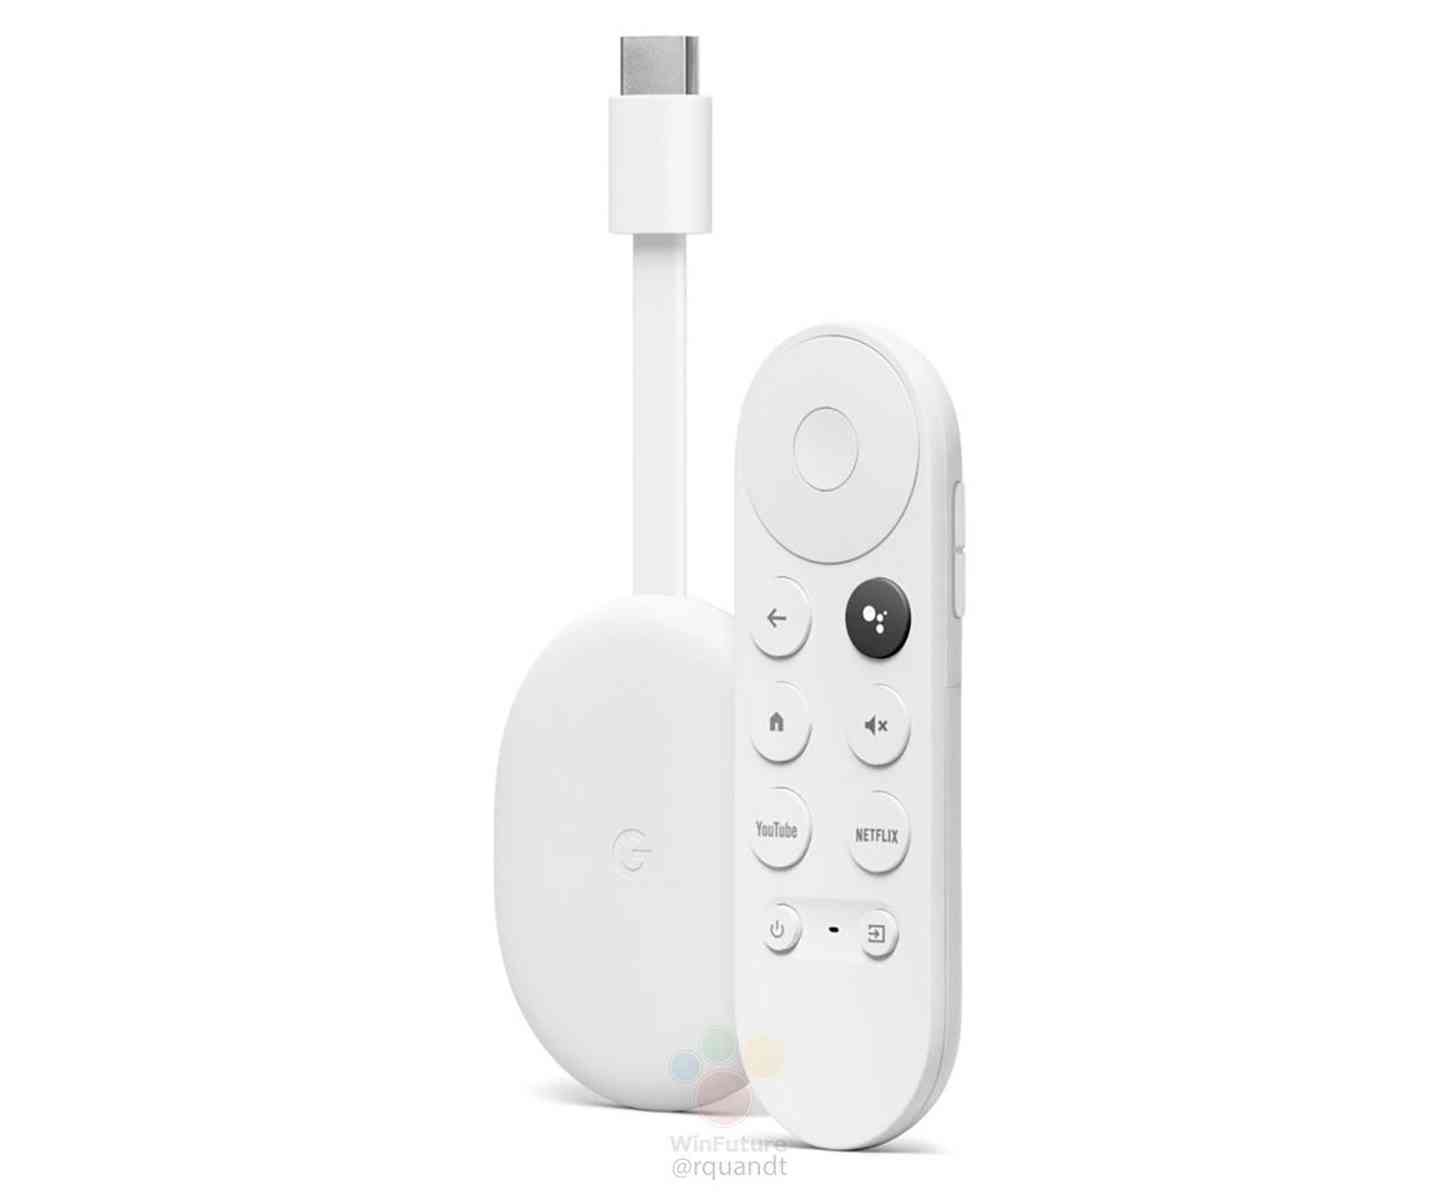 Google Chromecast with Android TV dongle, remote